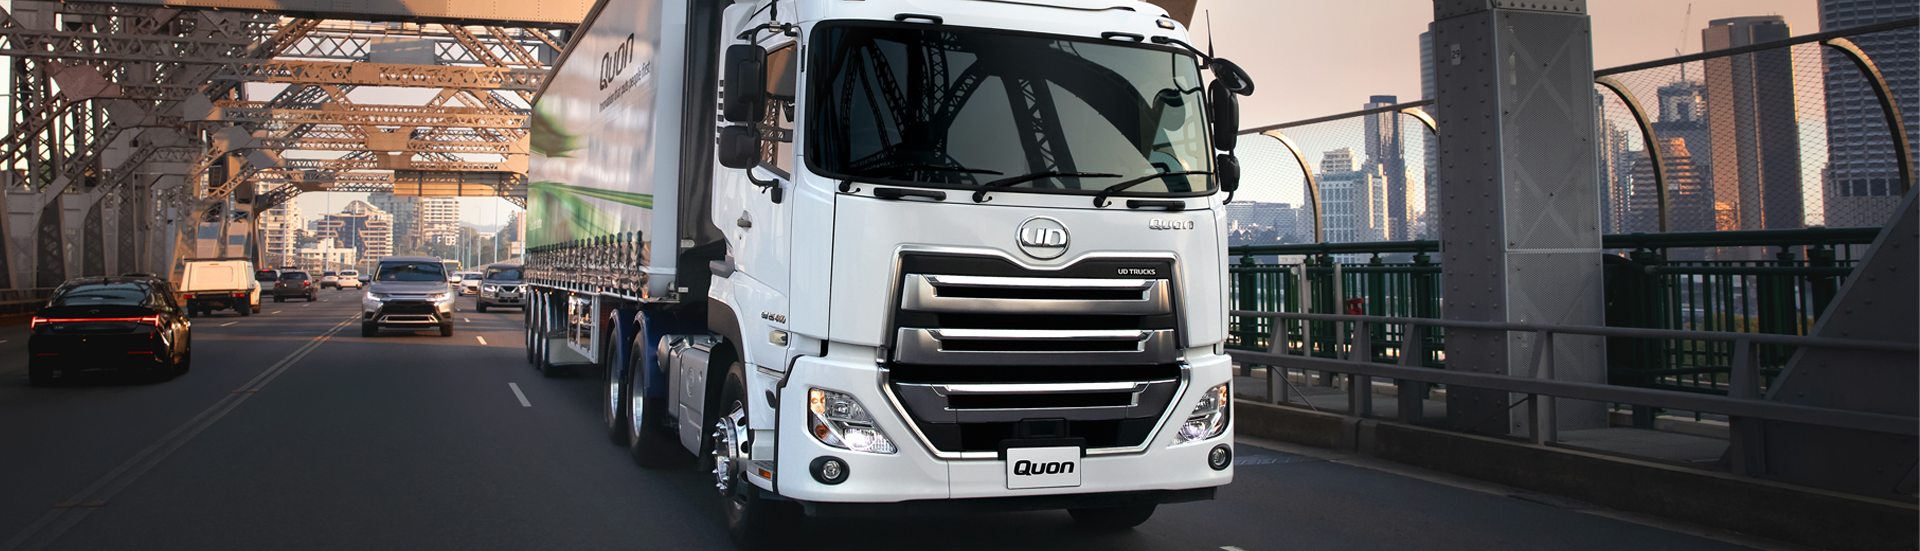 11L Quon – setting new standards in fuel efficiency, safety and productivity